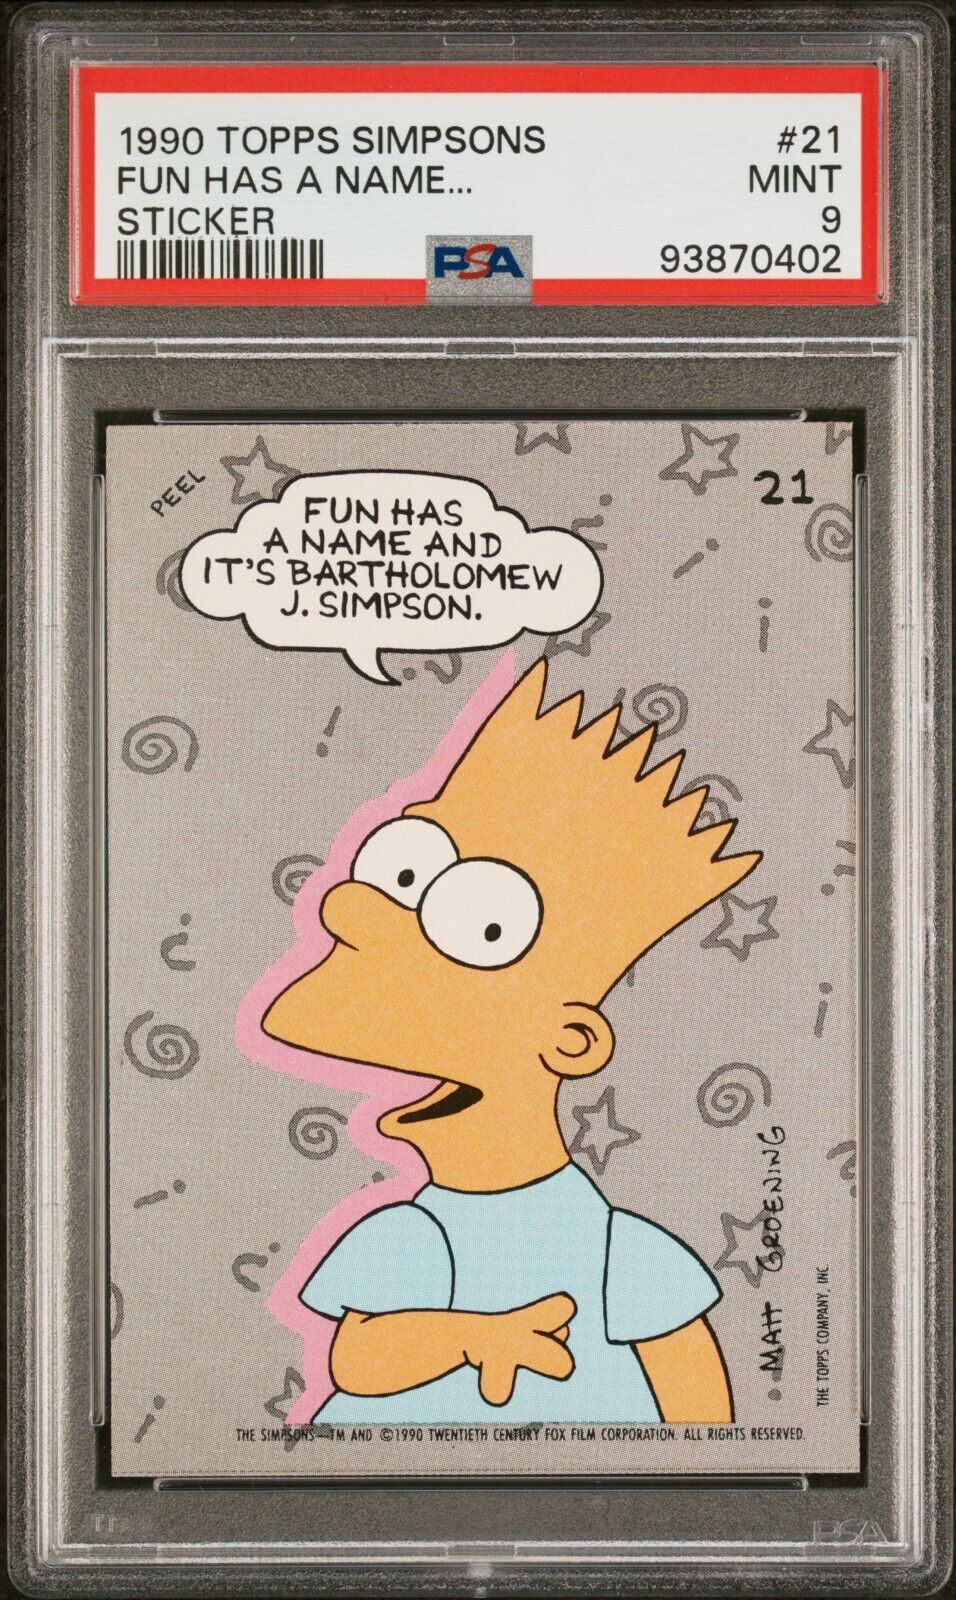 1990 Topps The Simpsons Stickers #21 Bart Simpson Fun Has a Name PSA 9 Mint